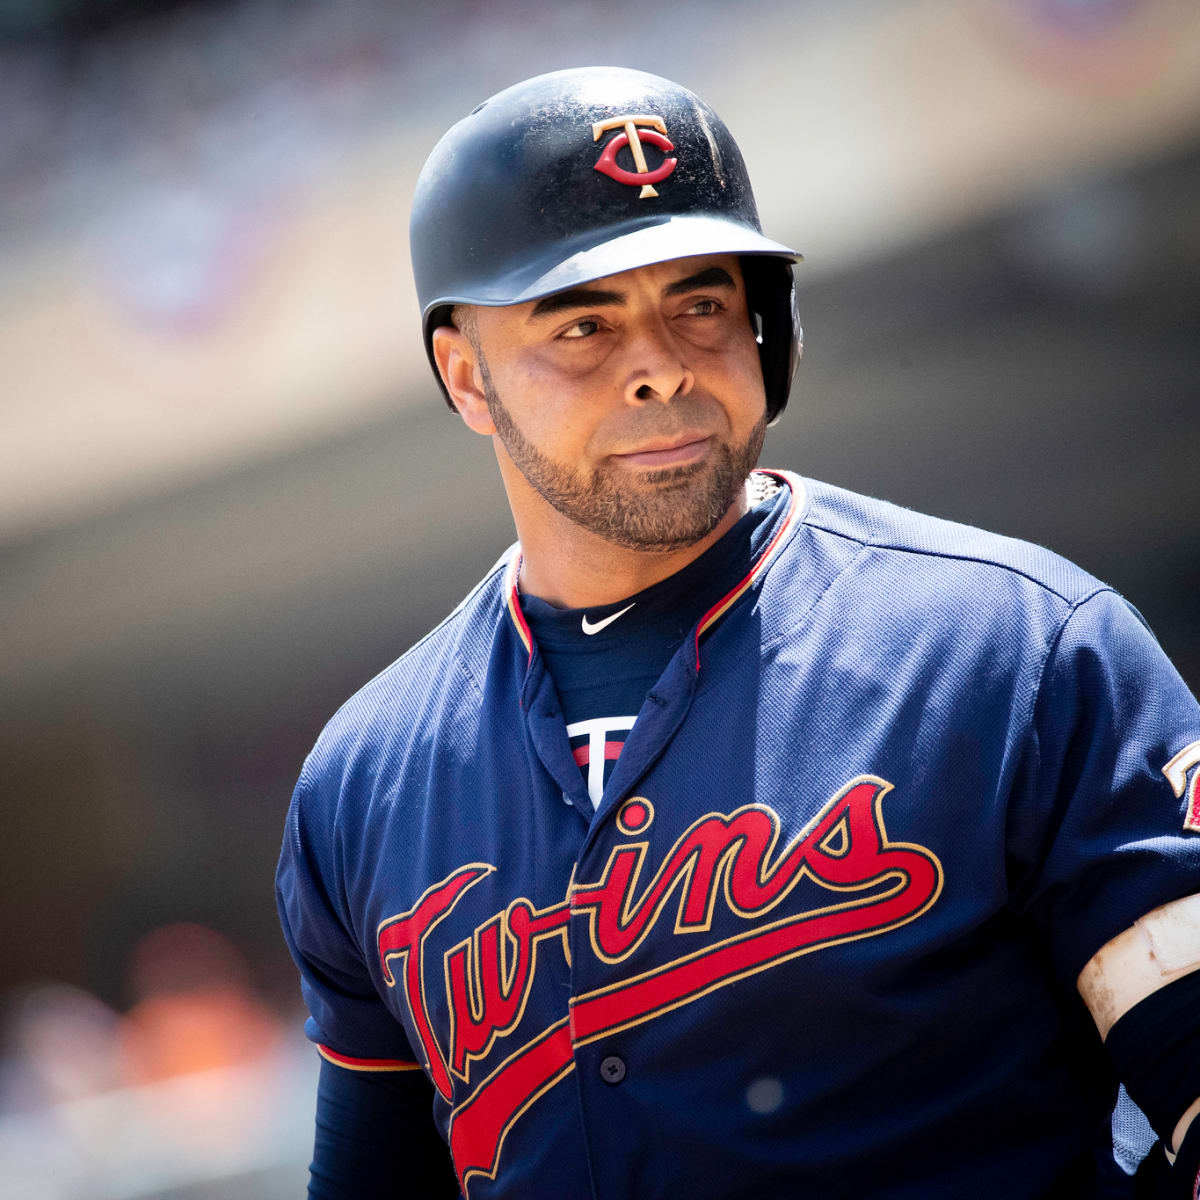 Nelson Cruz wind up in the Hall of Fame 